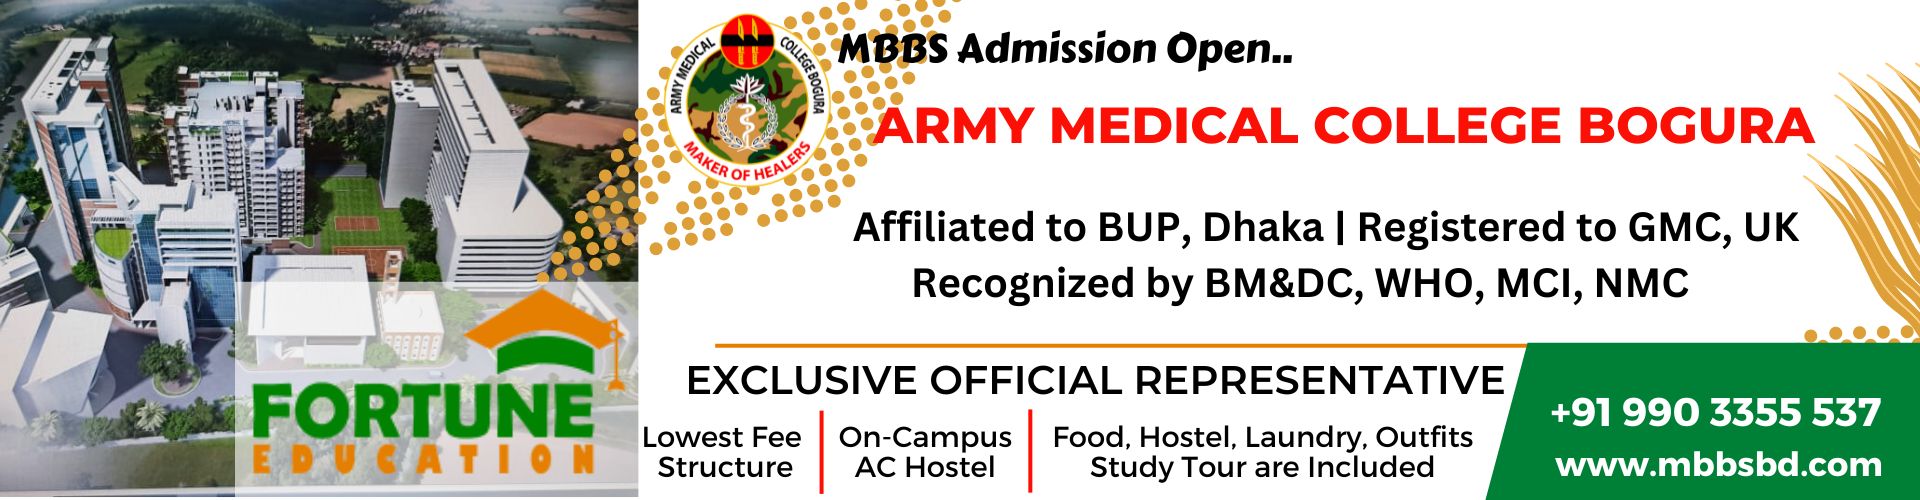 Army Medical College Bangladesh MBBS Admission, Eligibility, Fees & Fortune Education